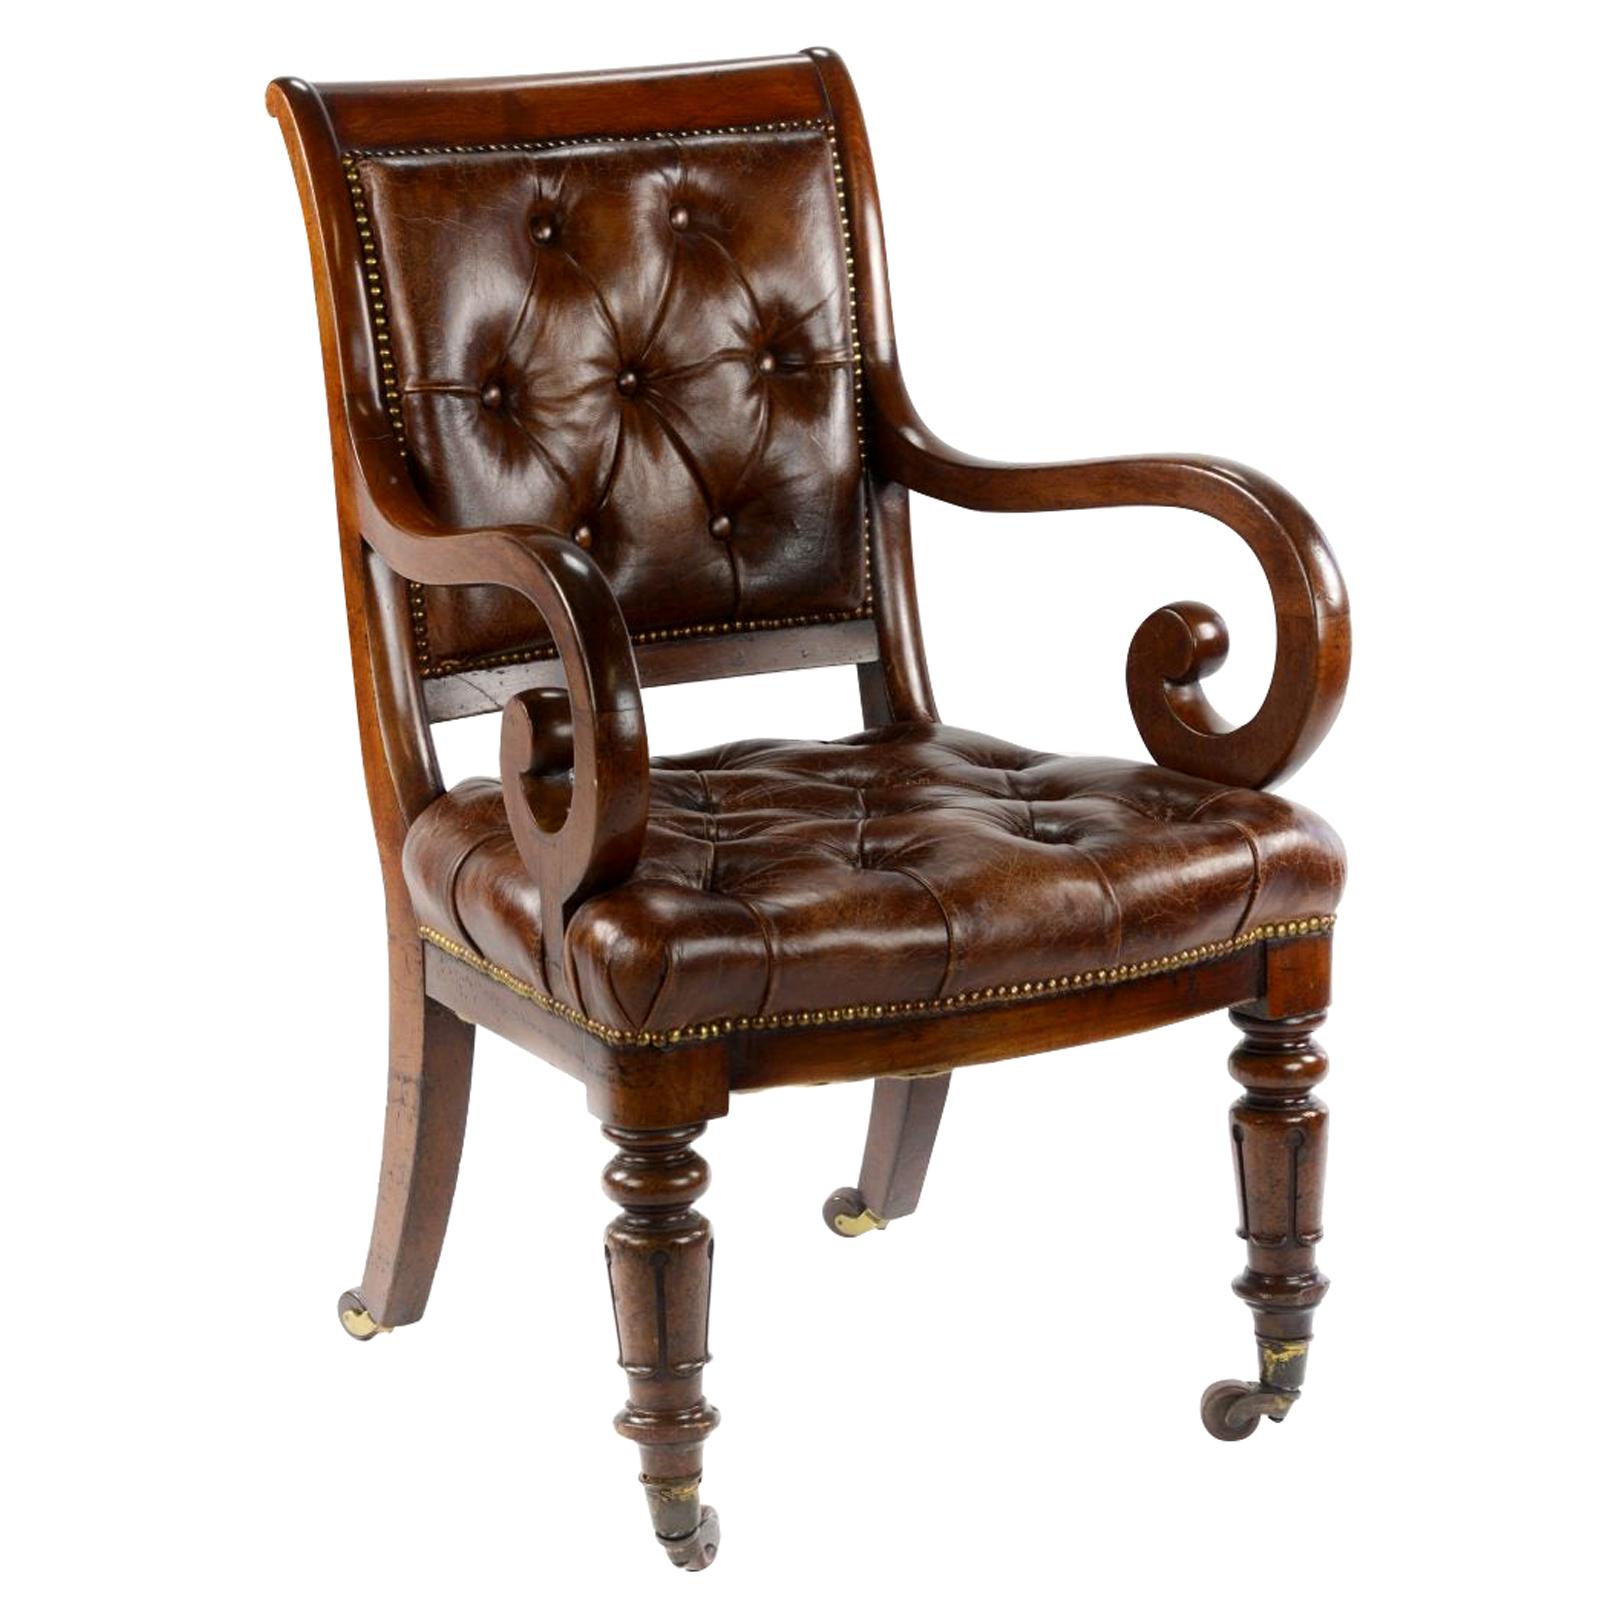 William iv Mahogany Desk or Library Chair attributed to Gillows 